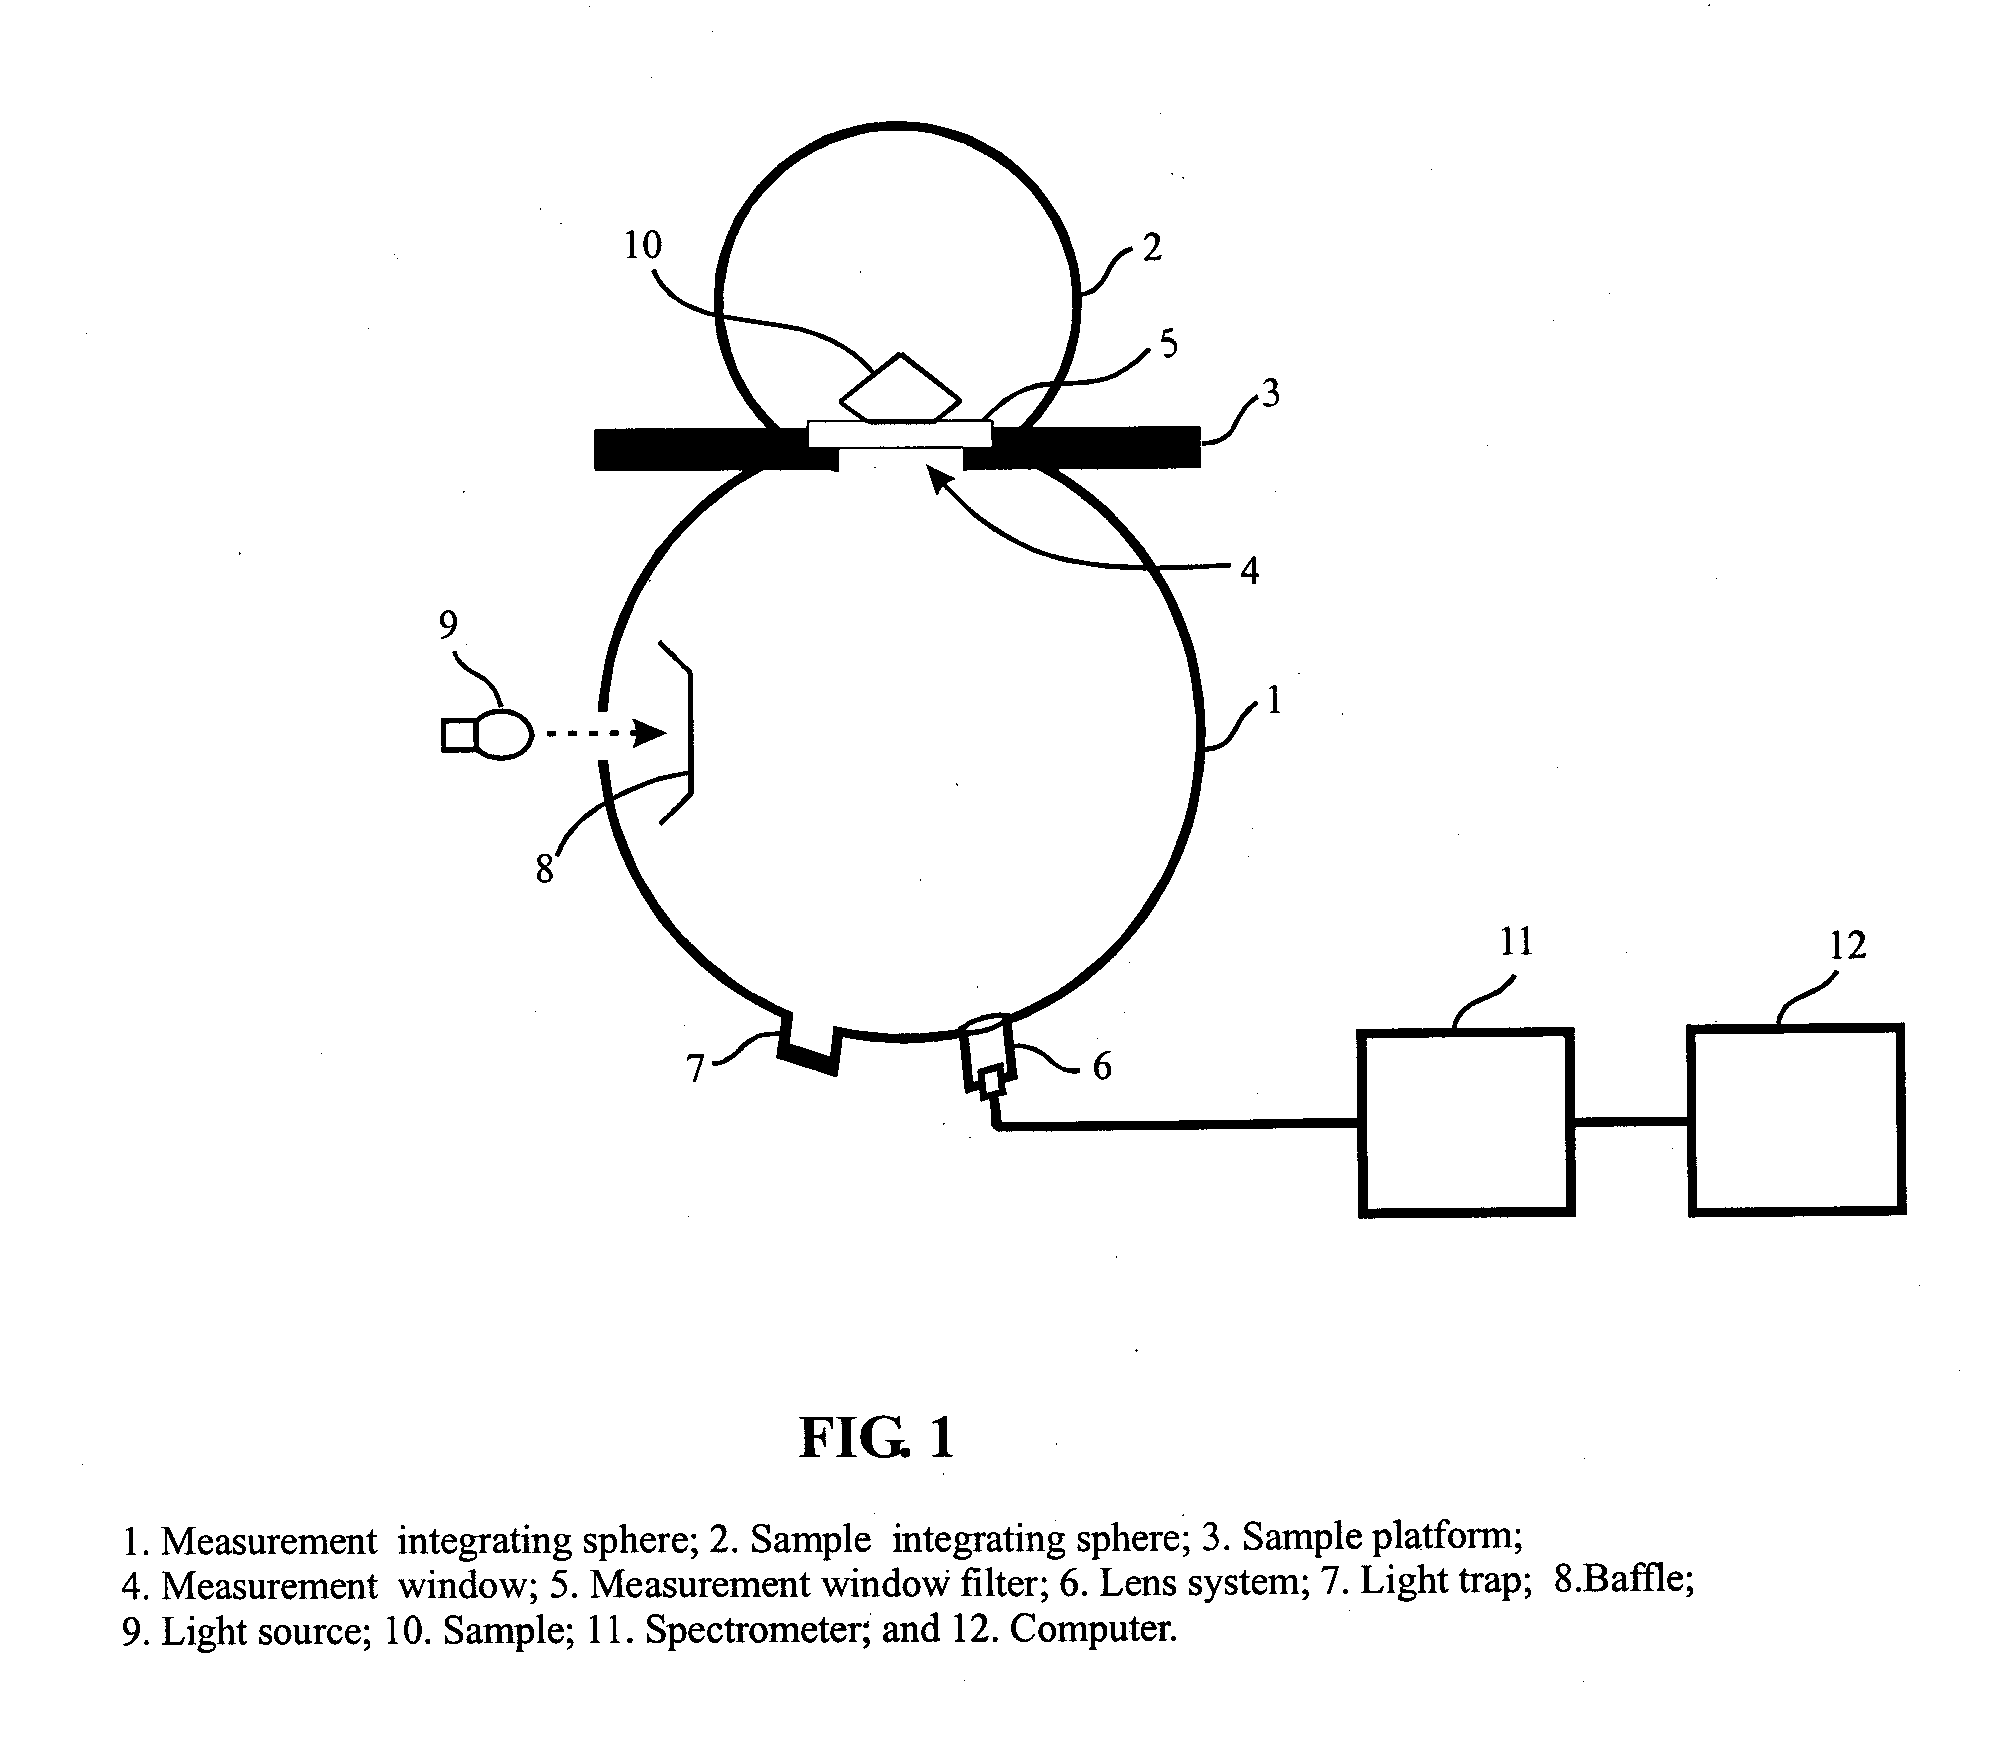 Apparatus and method for color measurement and color grading of diamonds, gemstones and the like